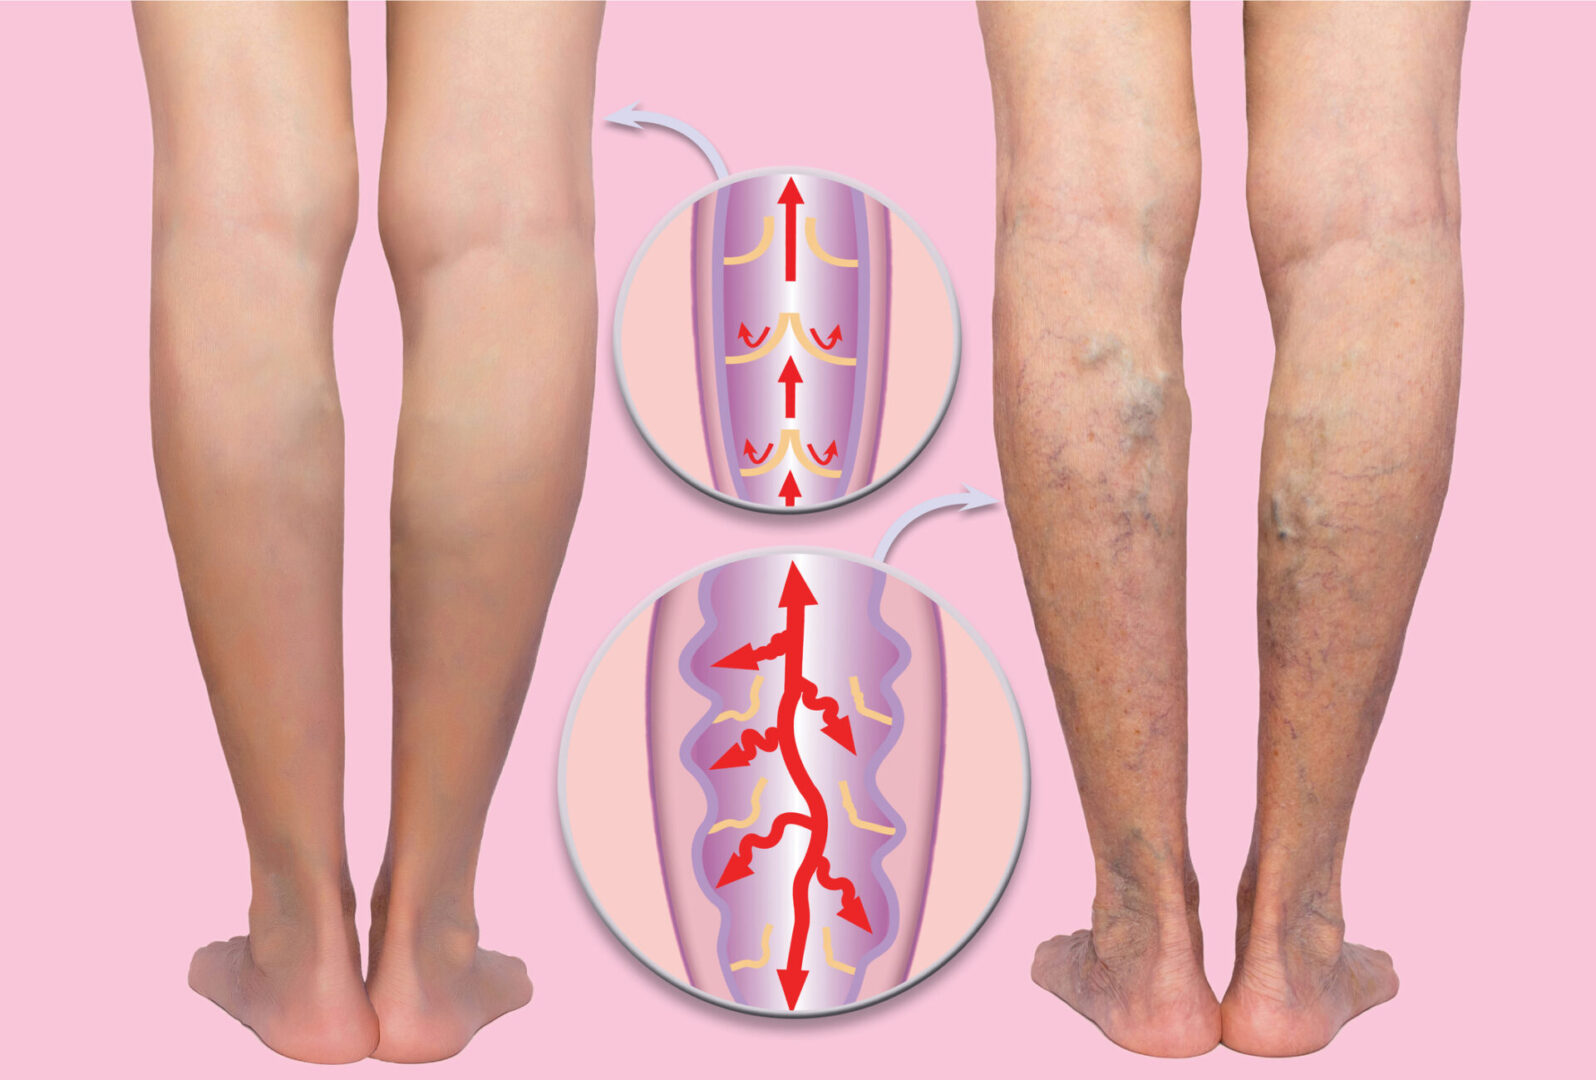 A man with varicose veins on his legs.